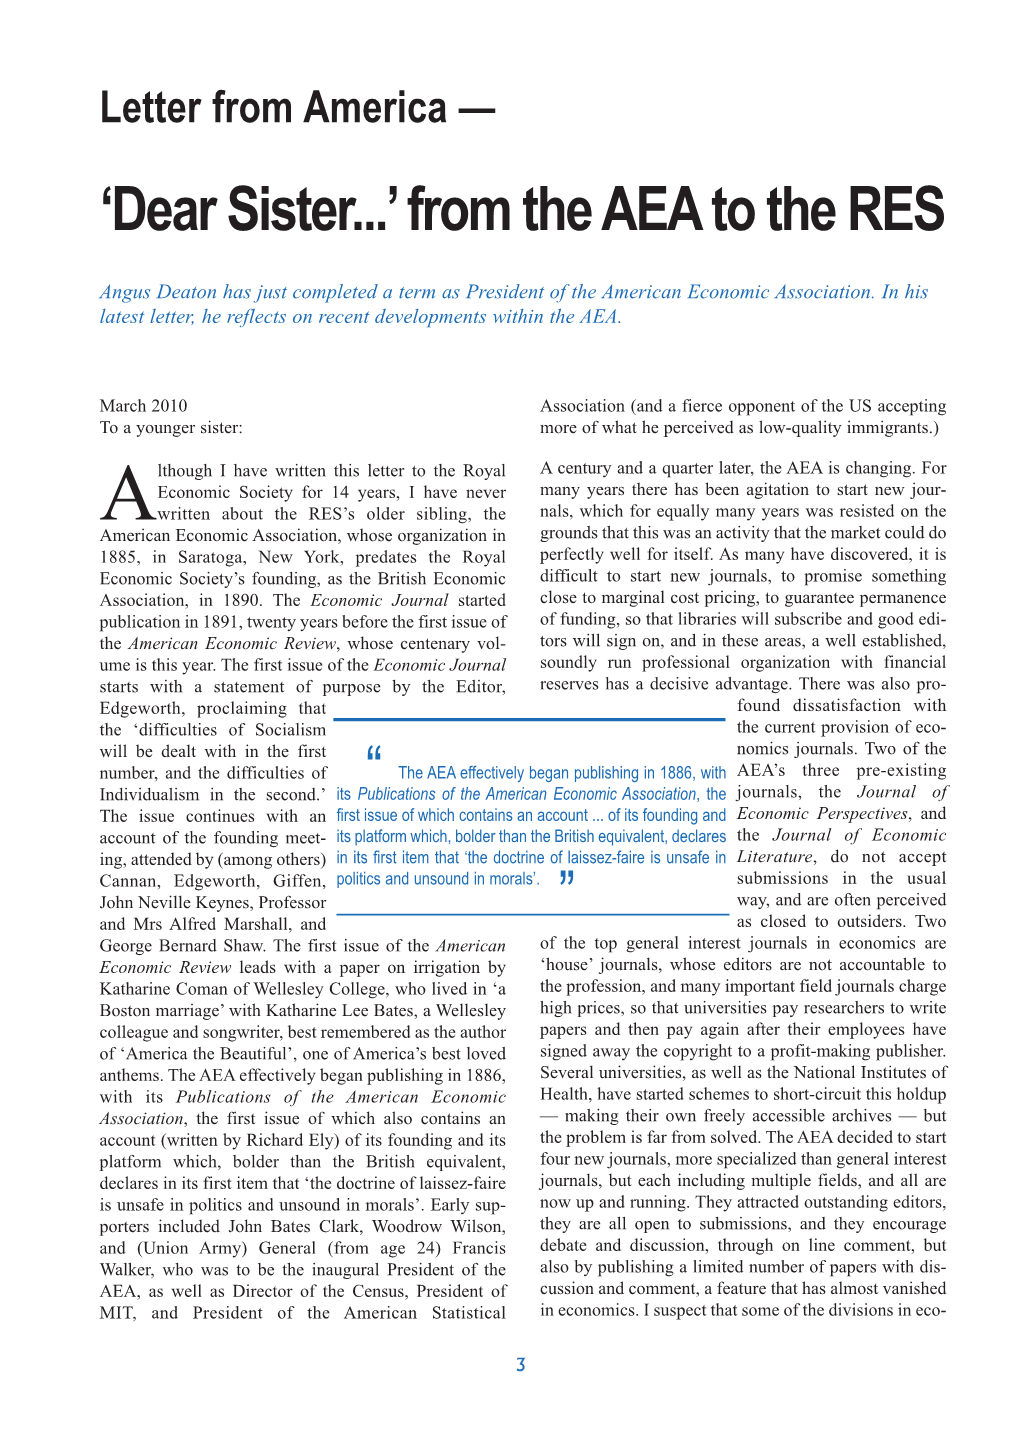 'Dear Sister...' from the AEA to the RES